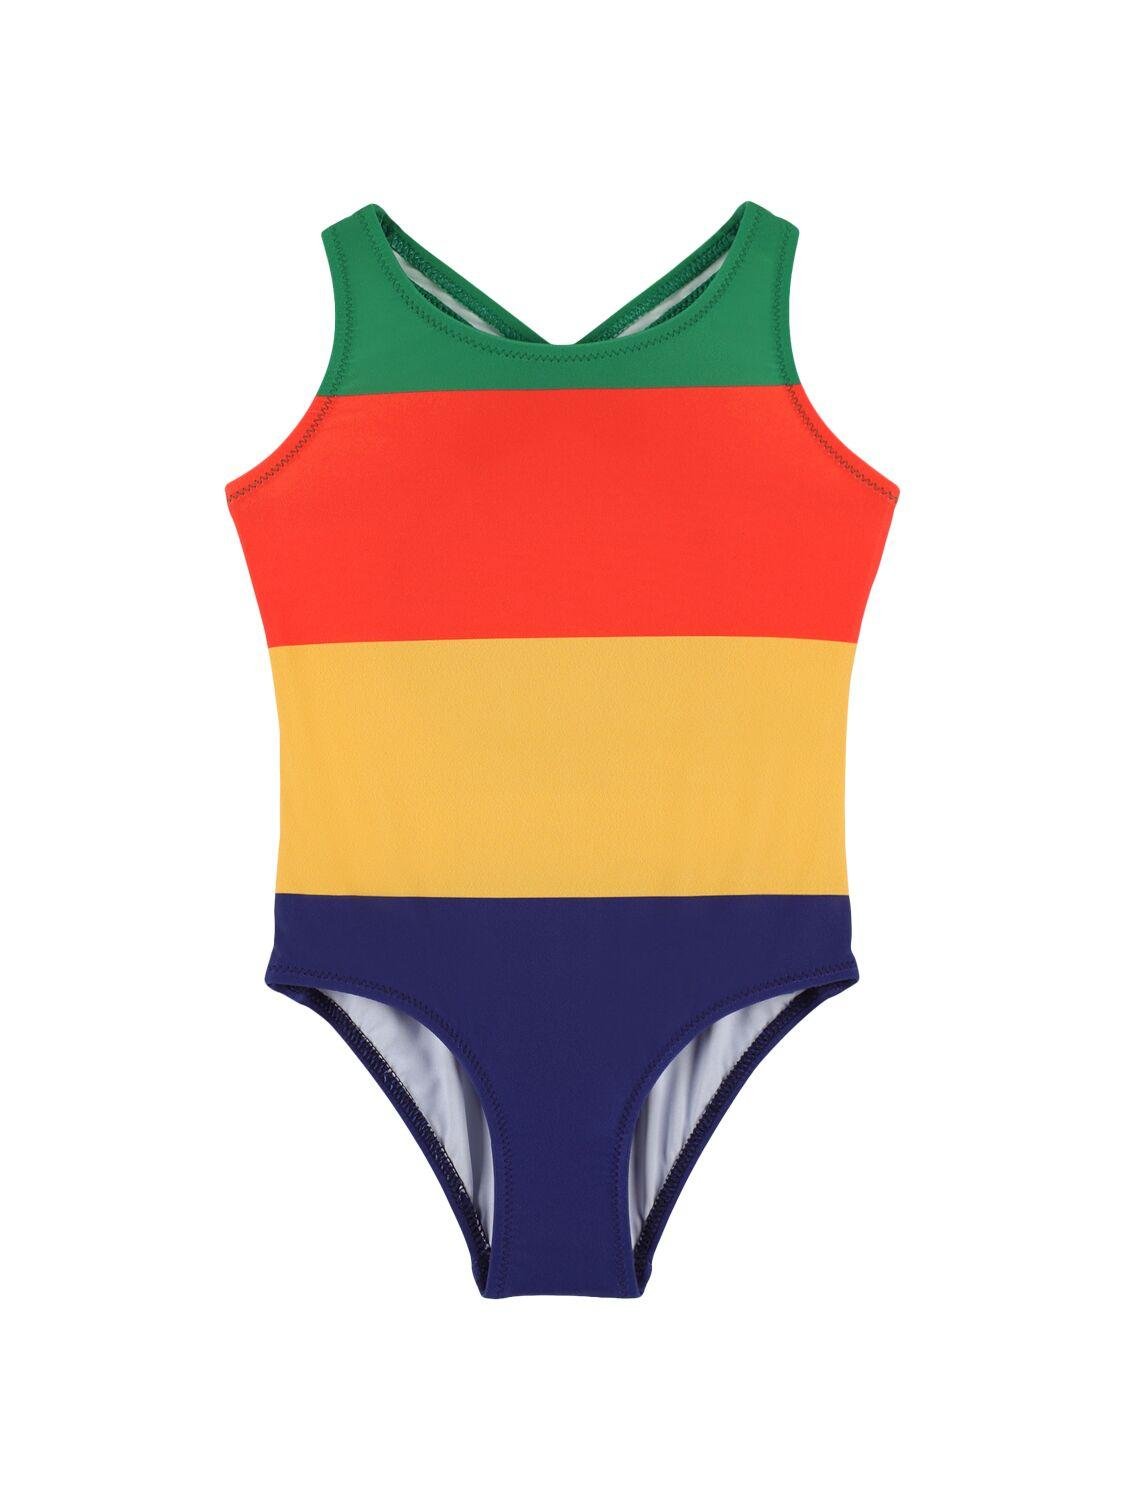 Striped Recycled Tech One Piece Swimsuit by MINI RODINI